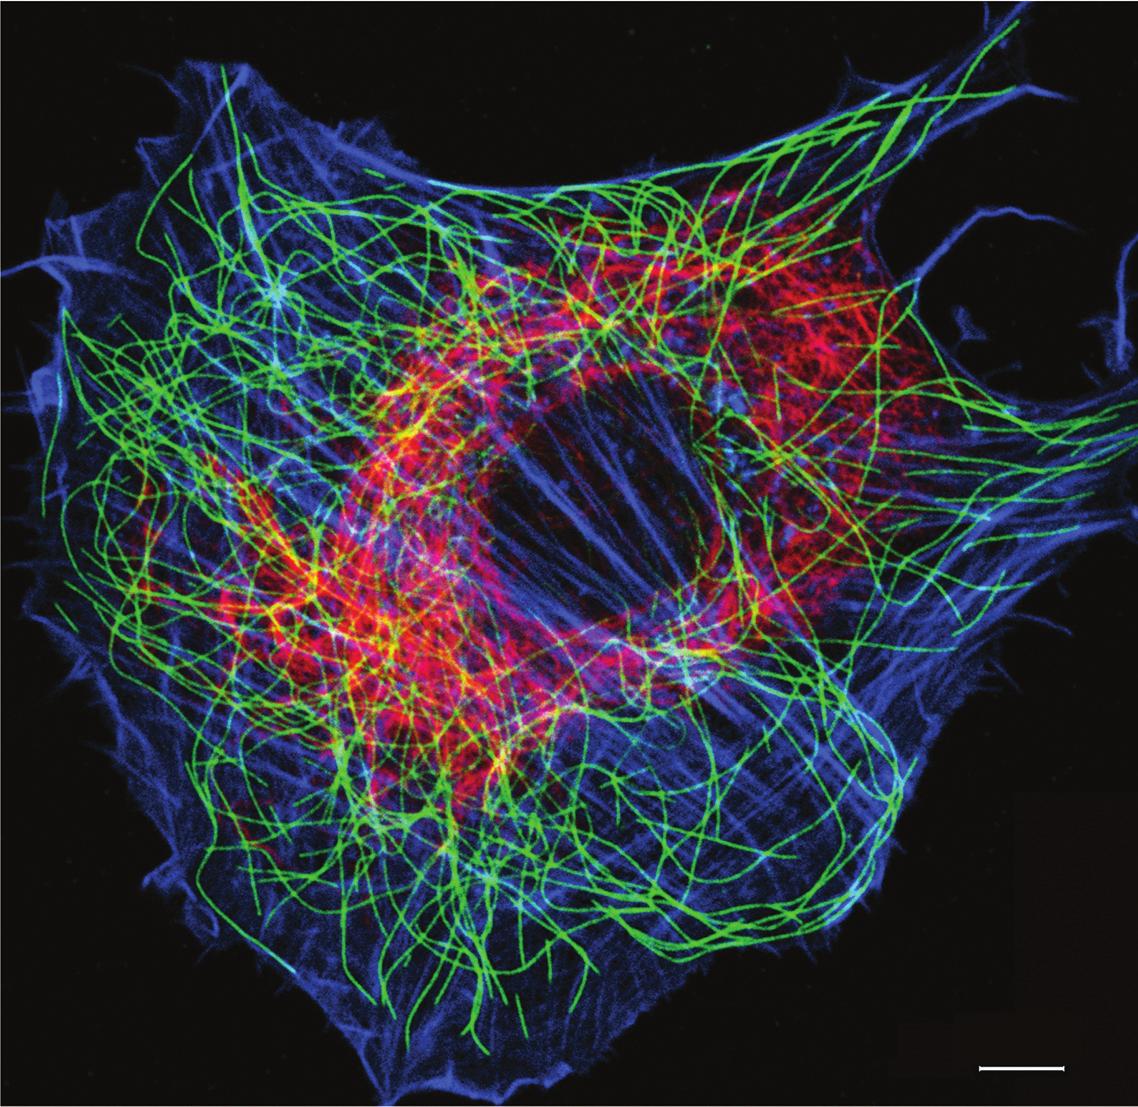 the cytoskeleton in cultured fibroblasts